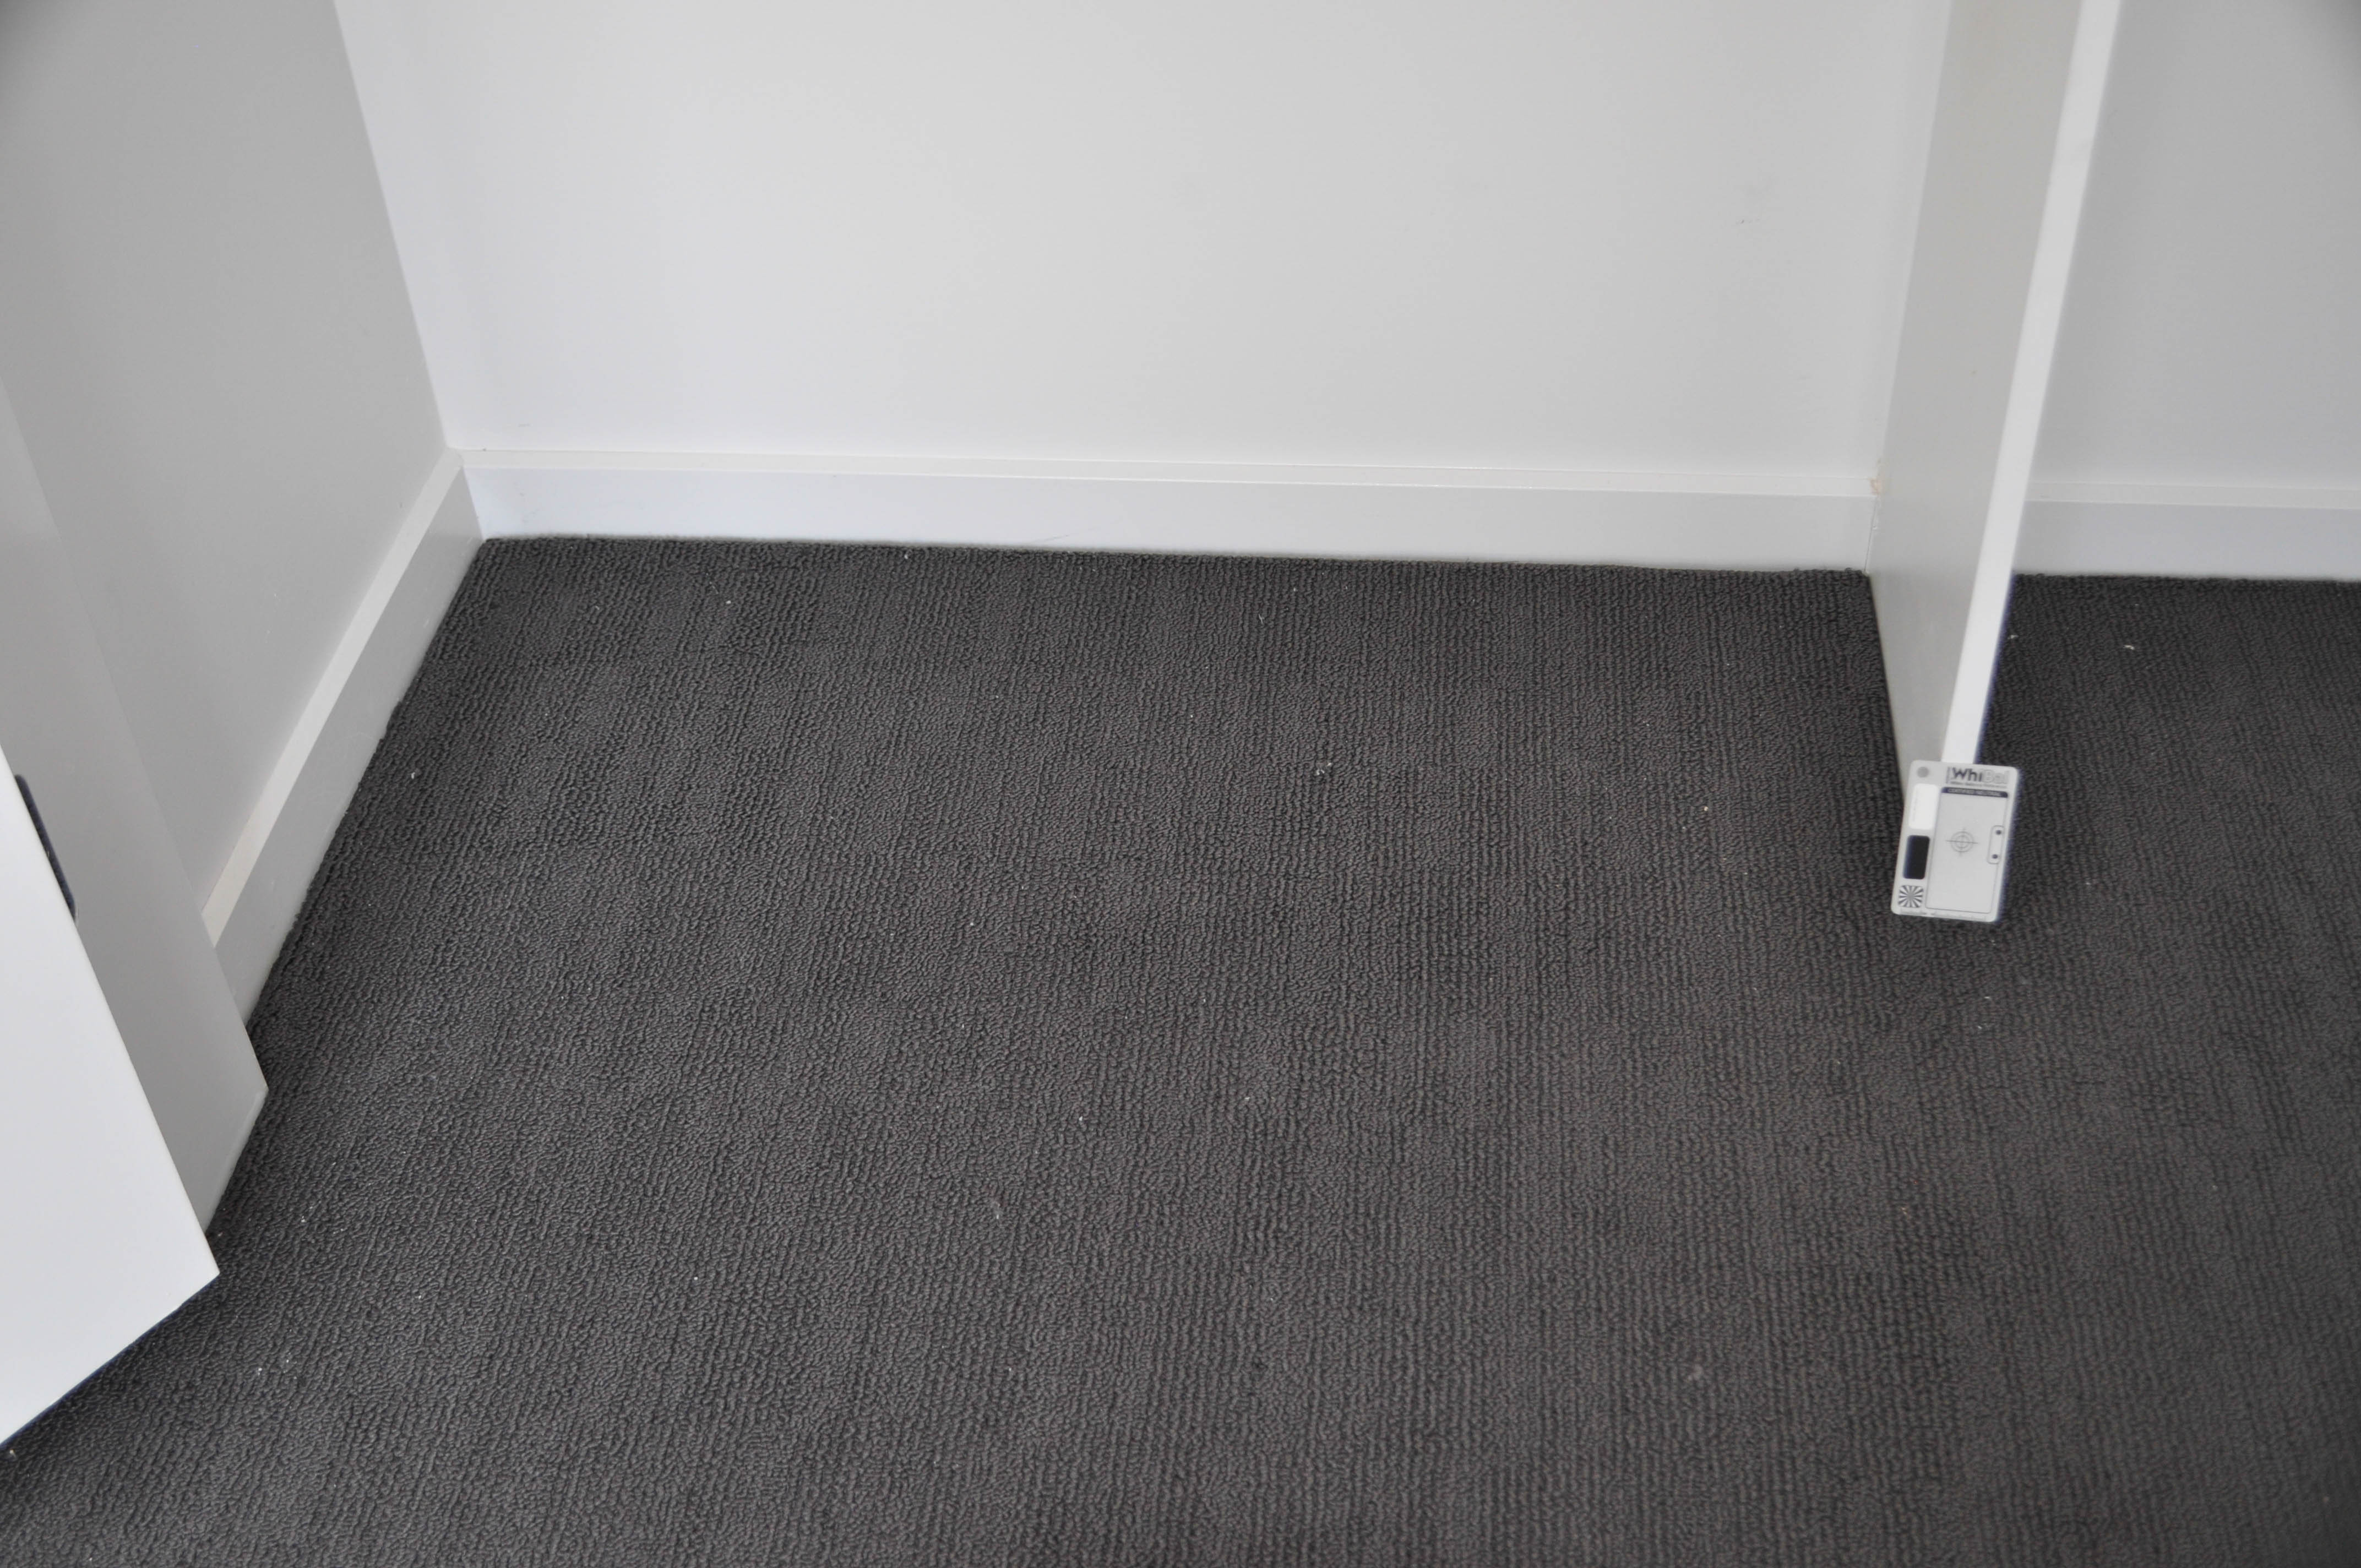 showing a bedroom wardrobe where the floor has been carpeted with a charcoal patterned carpet.